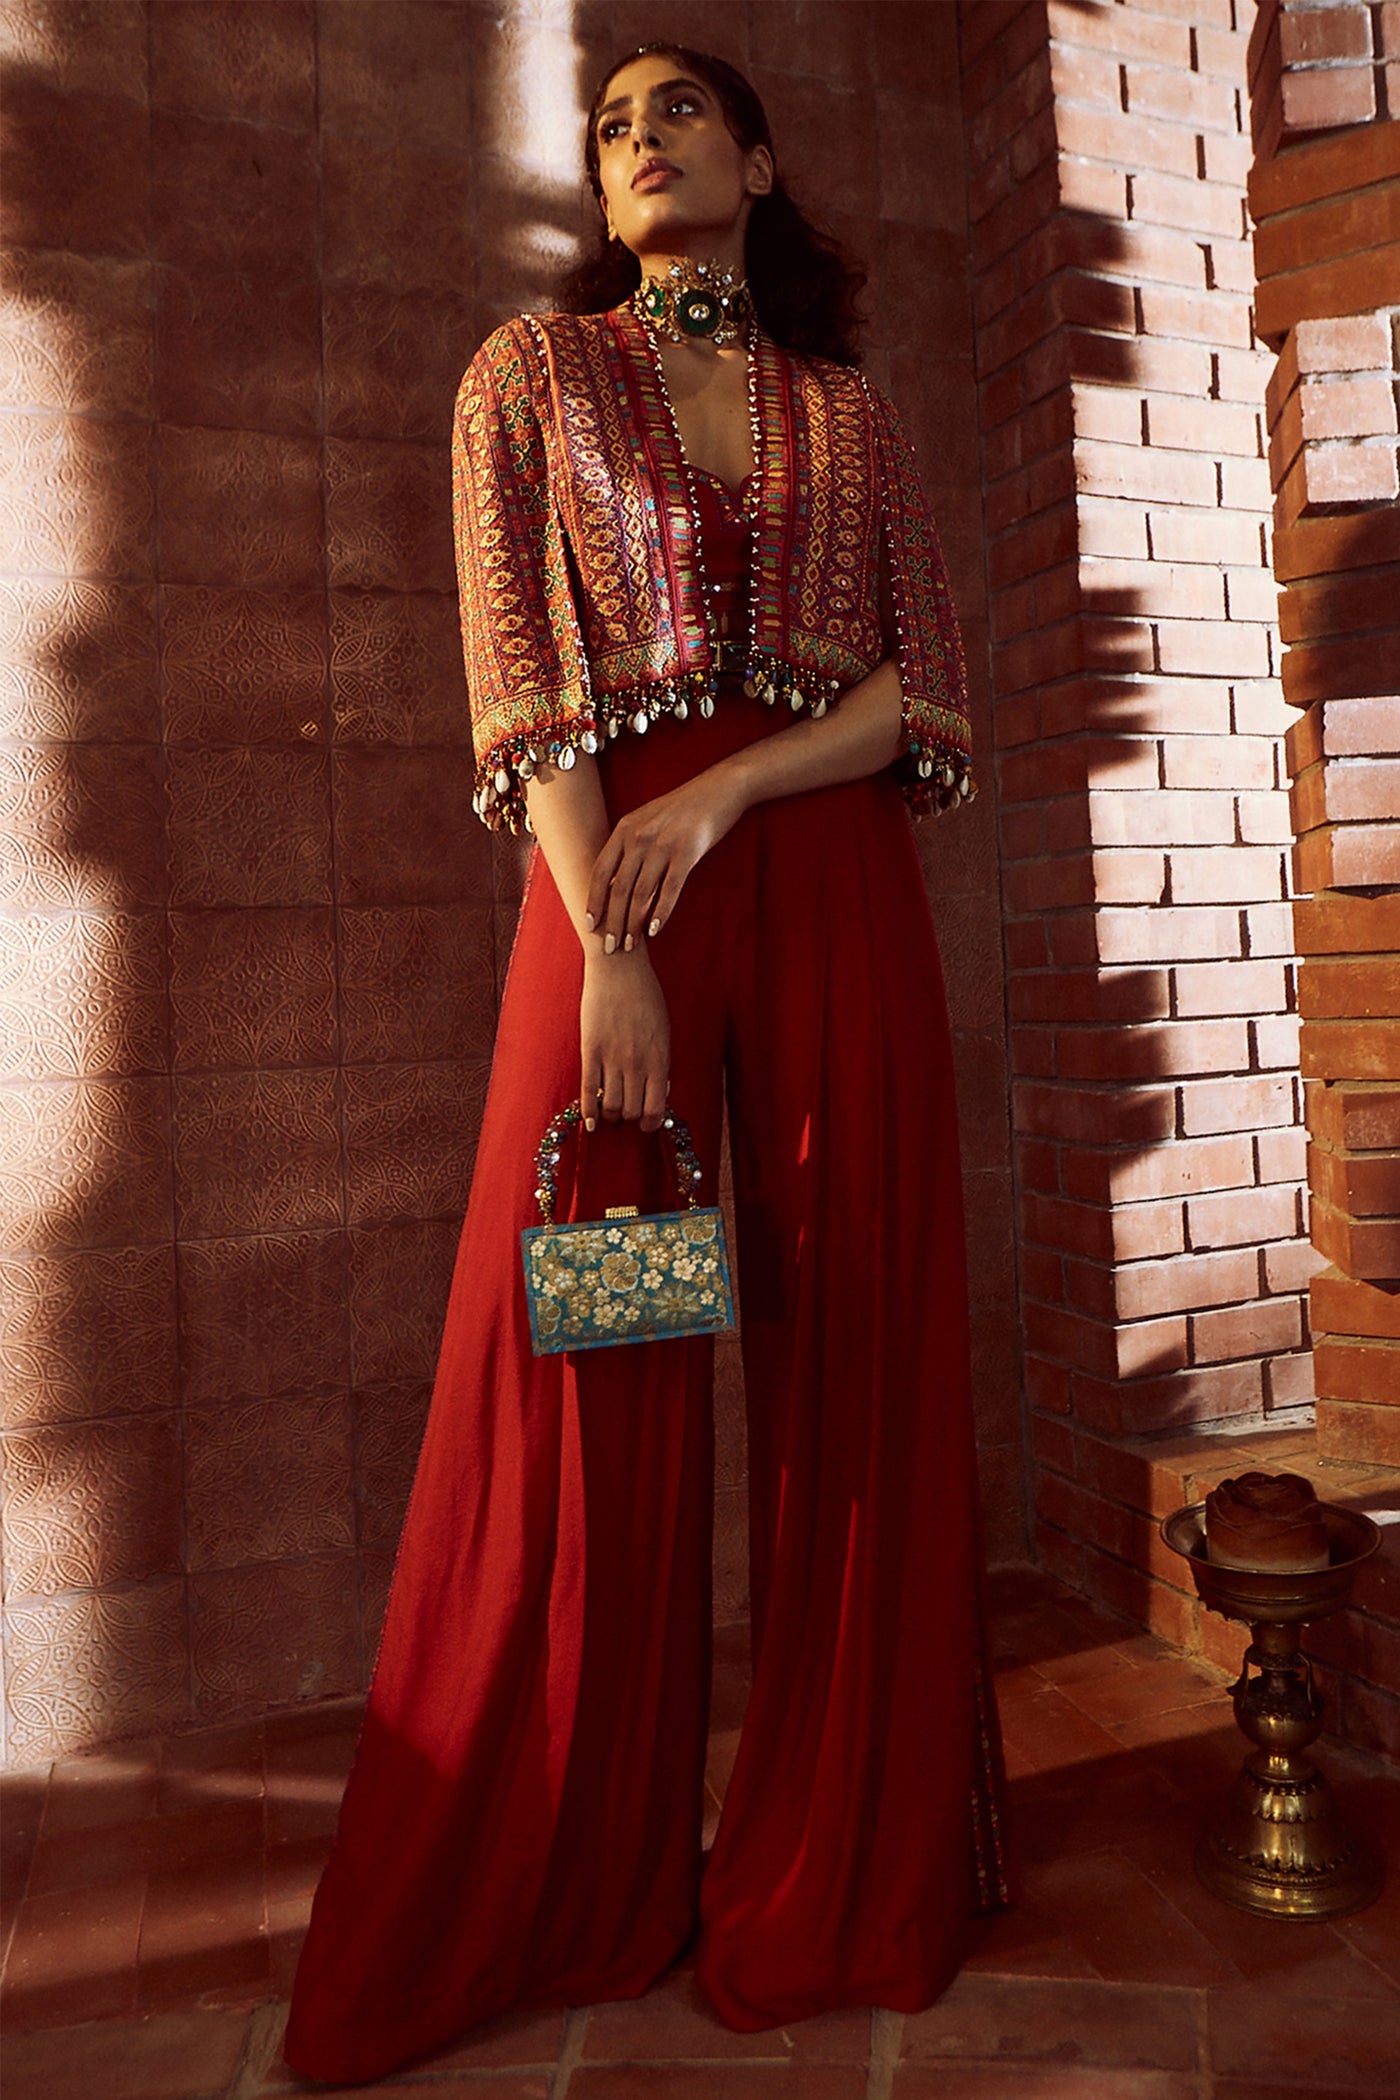 Tarun Tahiliani Digitally Printed Cape In Ikat Motifs Paired With Flared Jumpsuit red festive indian designer wear online shopping melange singapore